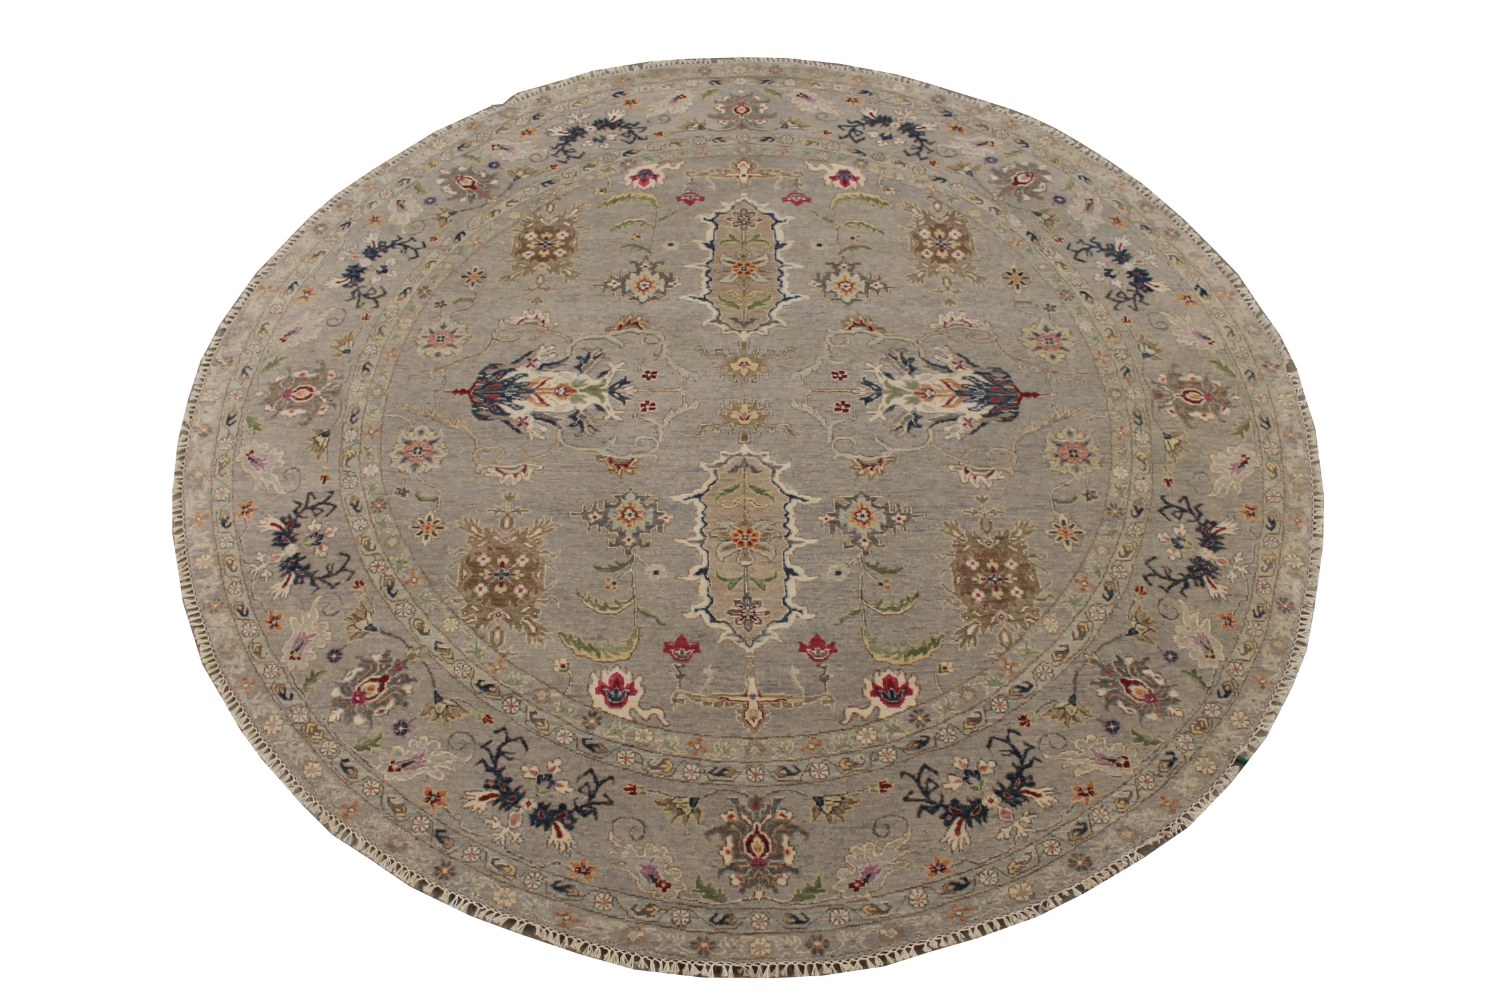 8 ft. Round & Square Traditional Hand Knotted Wool Area Rug - MR028558